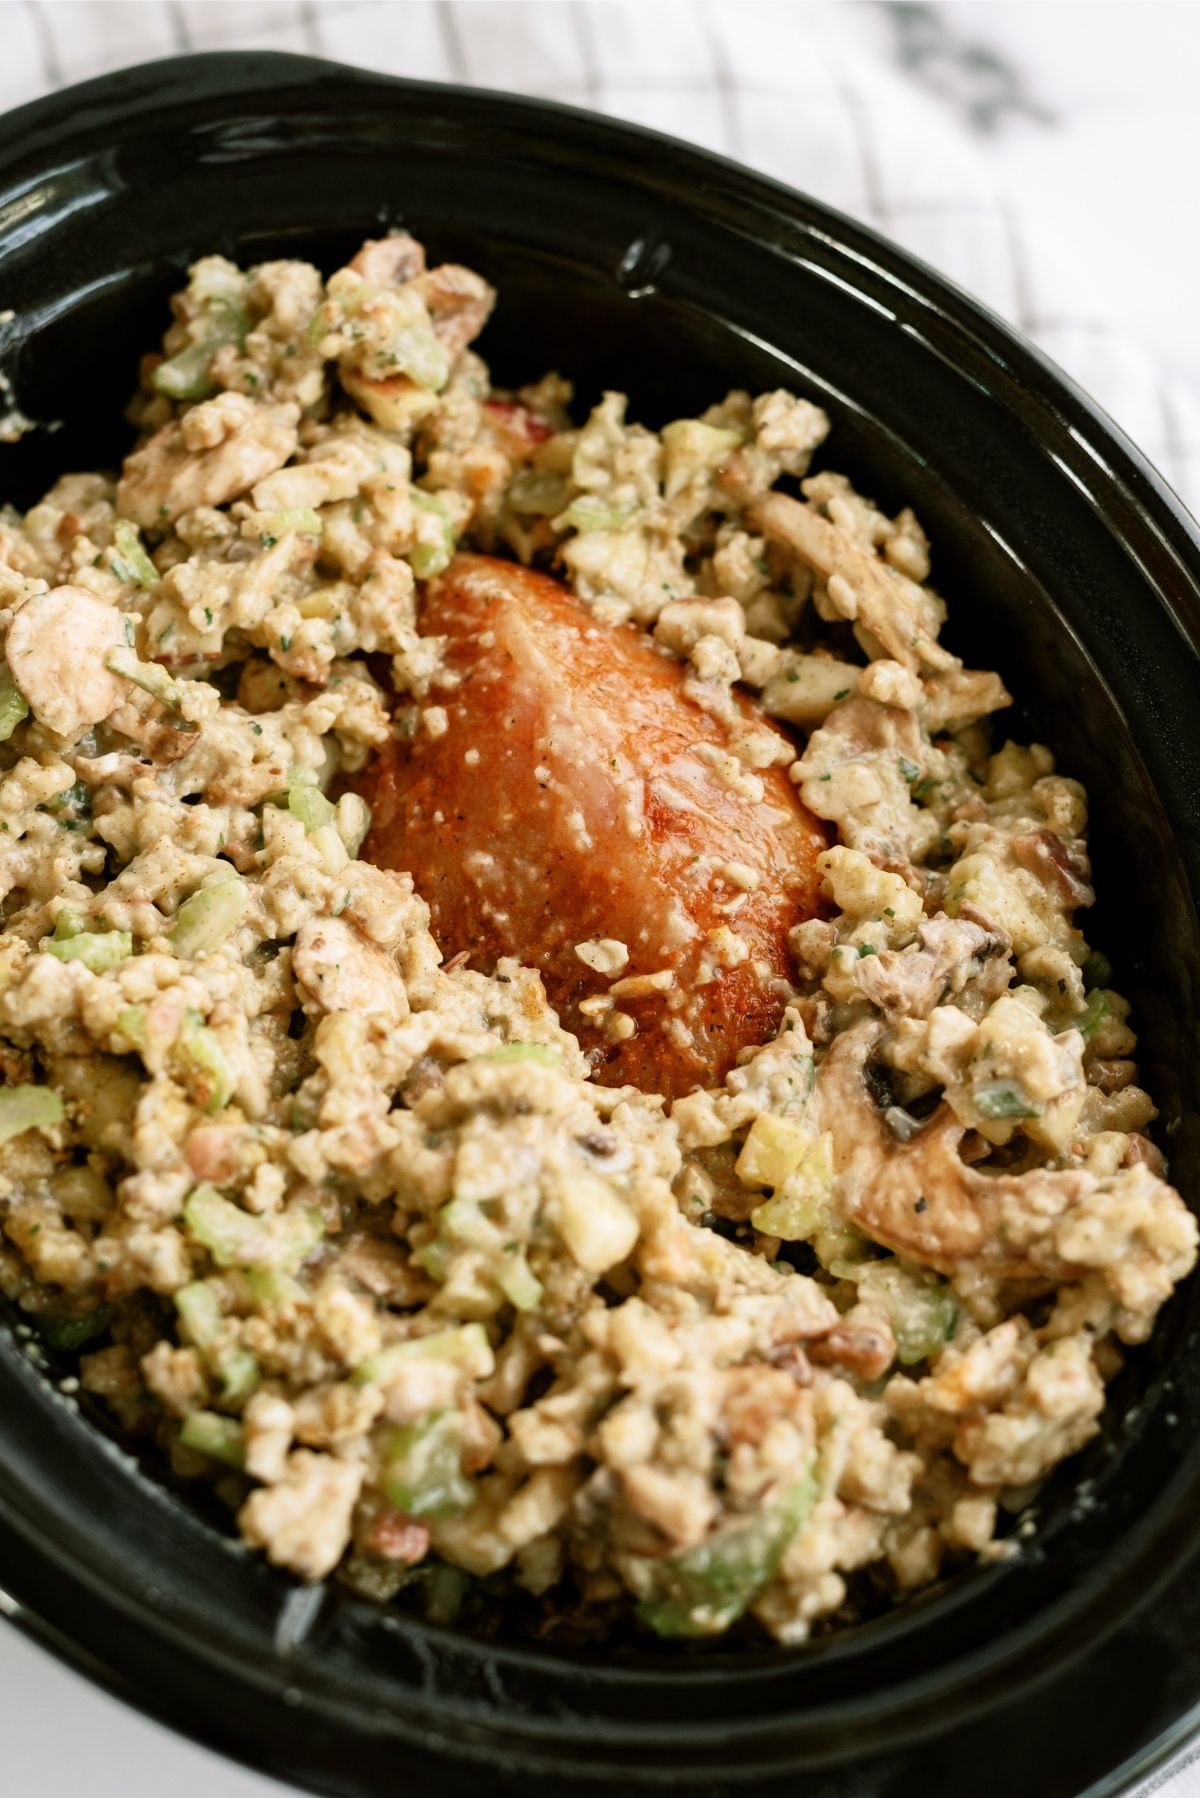 Turkey breast with stuffing on top and sides of it in the slow cooker